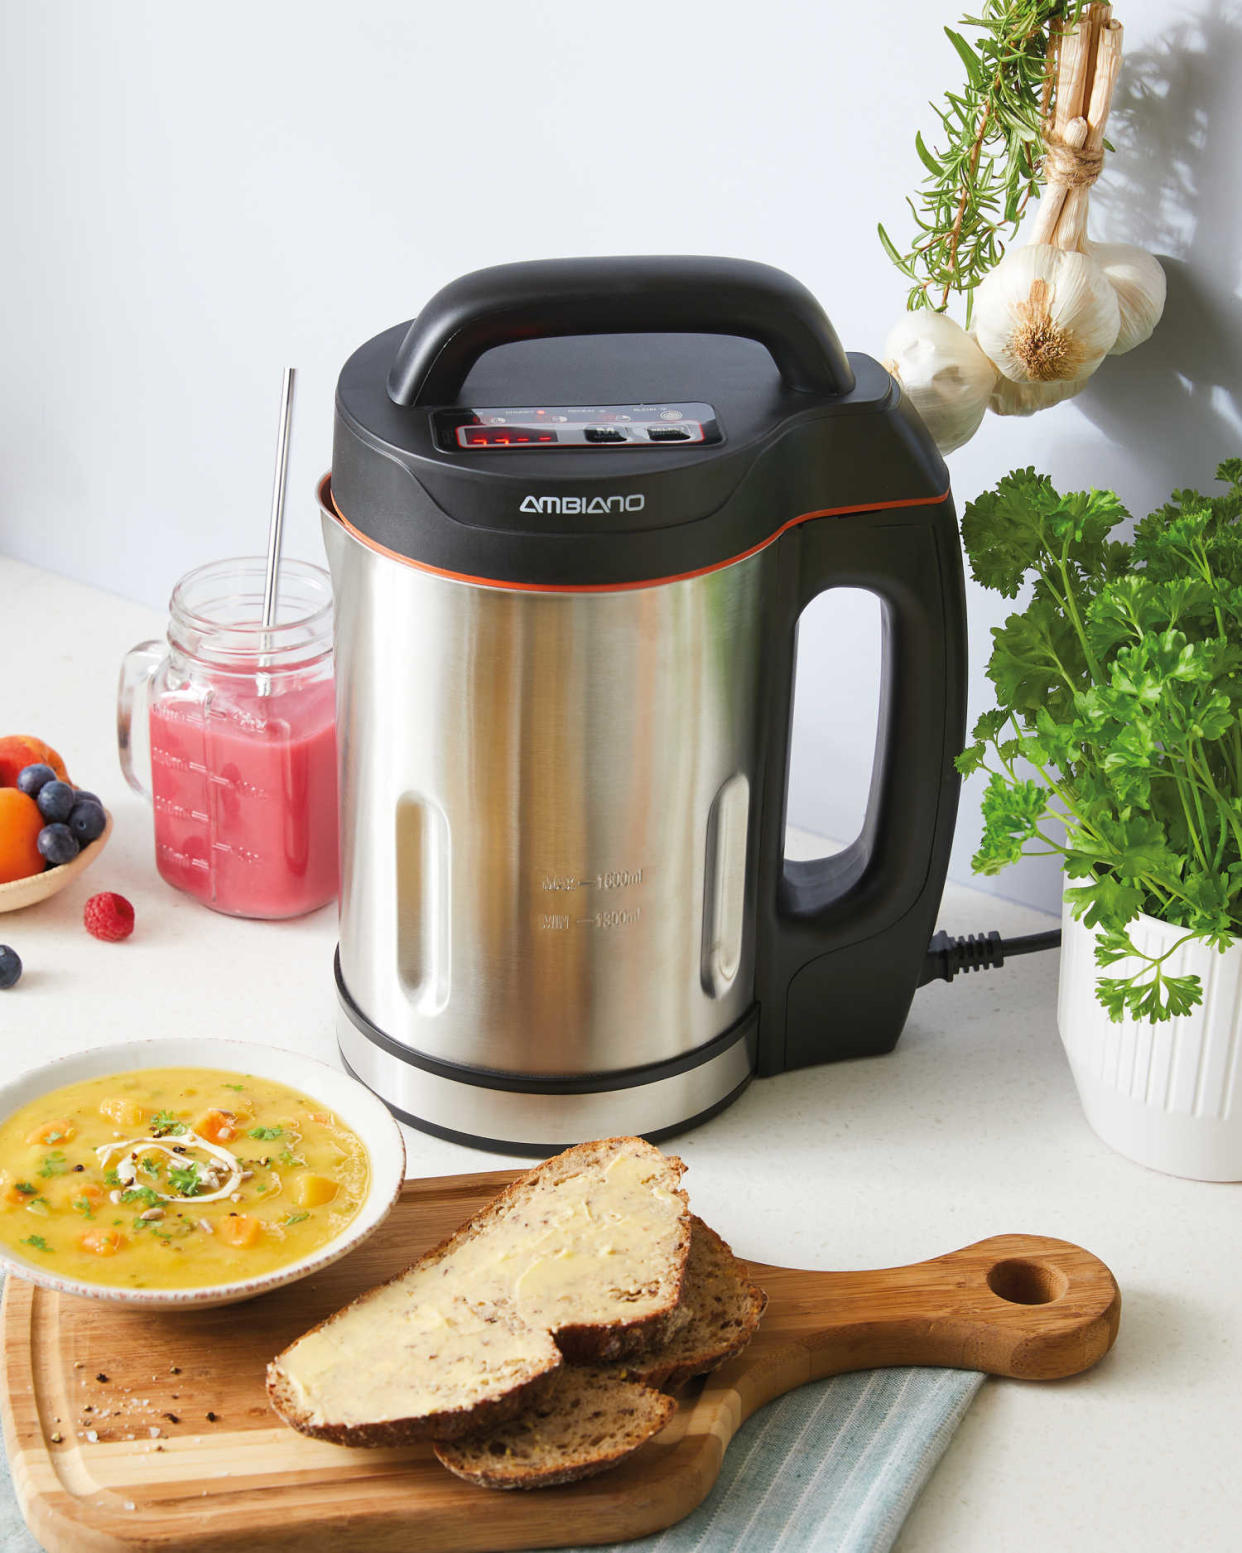 Ambiano Soup Maker is ideal for warming winter meals. (Aldi)